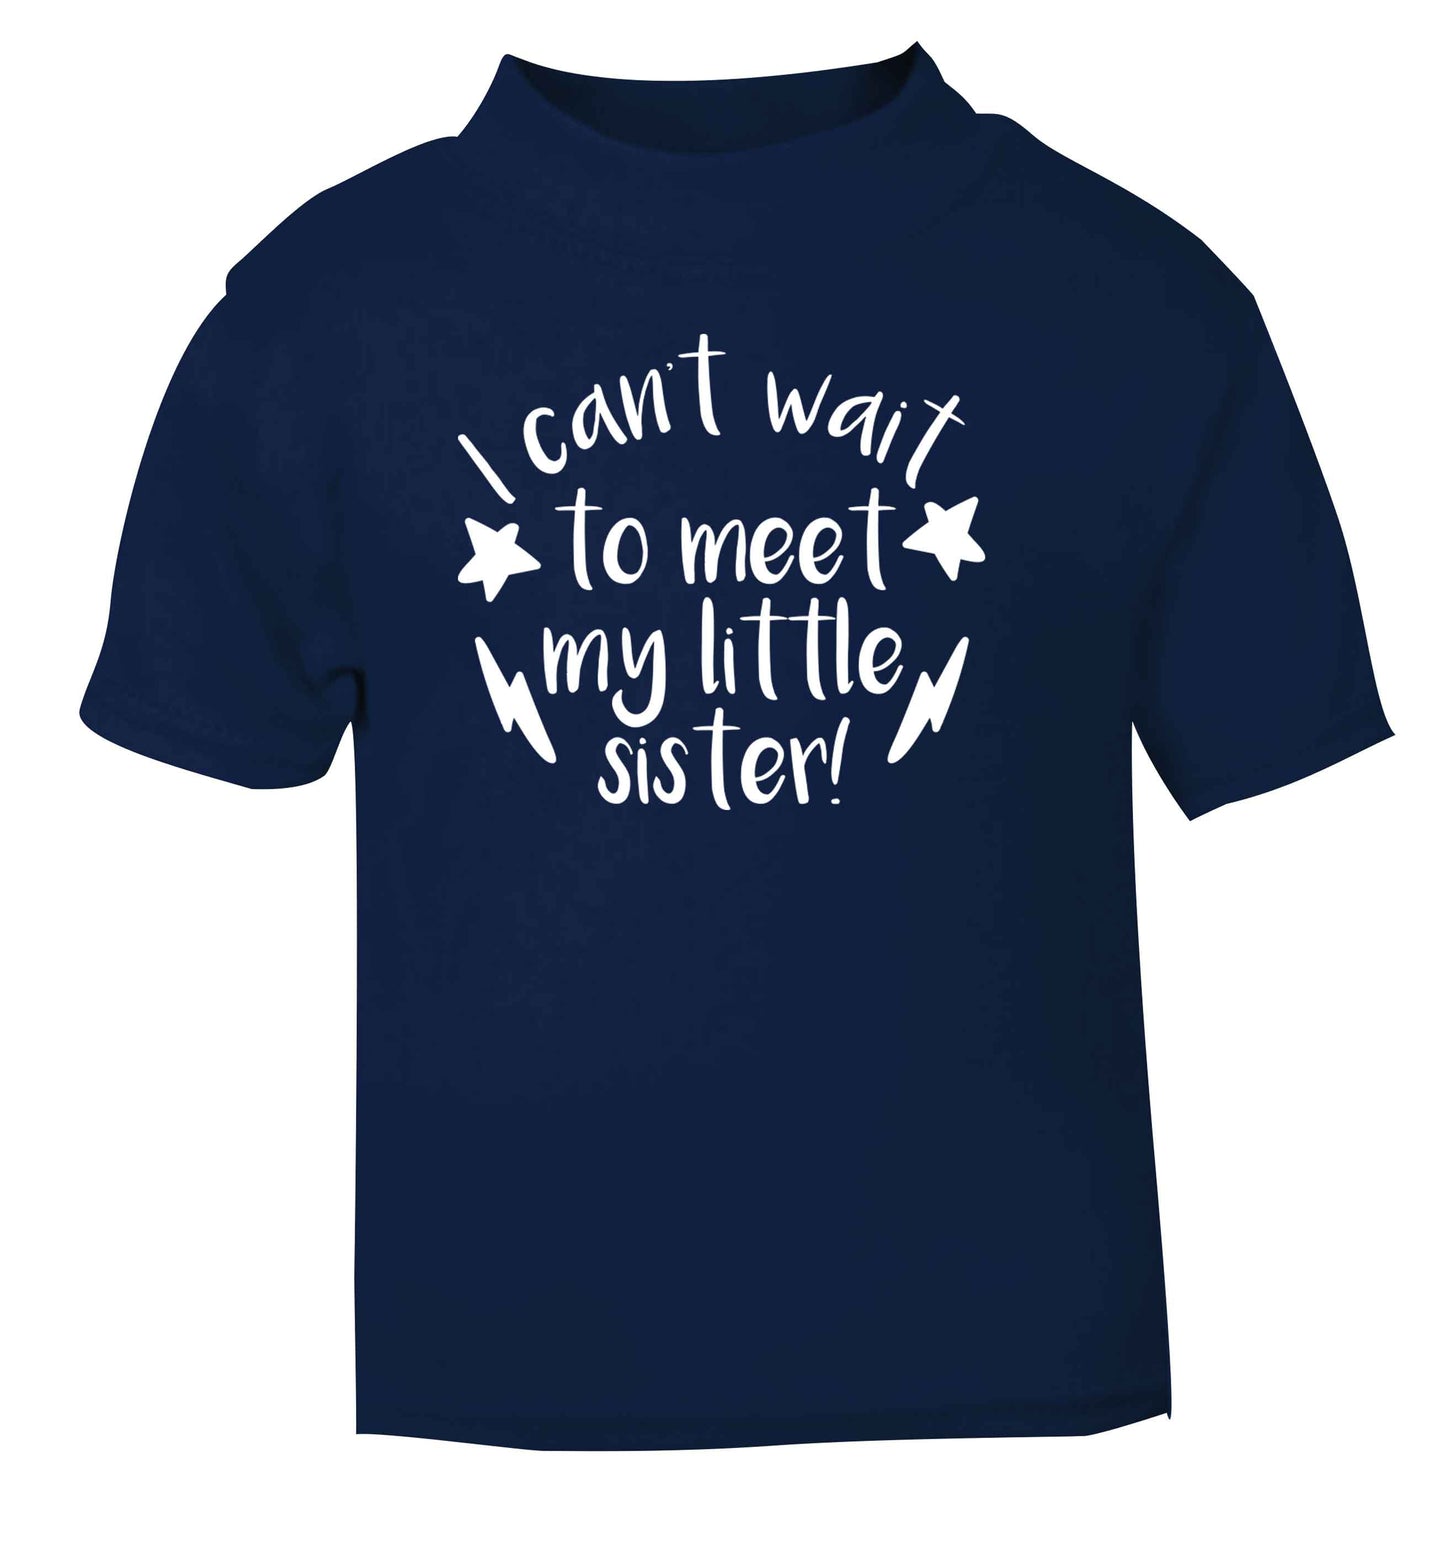 Something special growing inside it's my little sister I can't wait to say hi! navy Baby Toddler Tshirt 2 Years